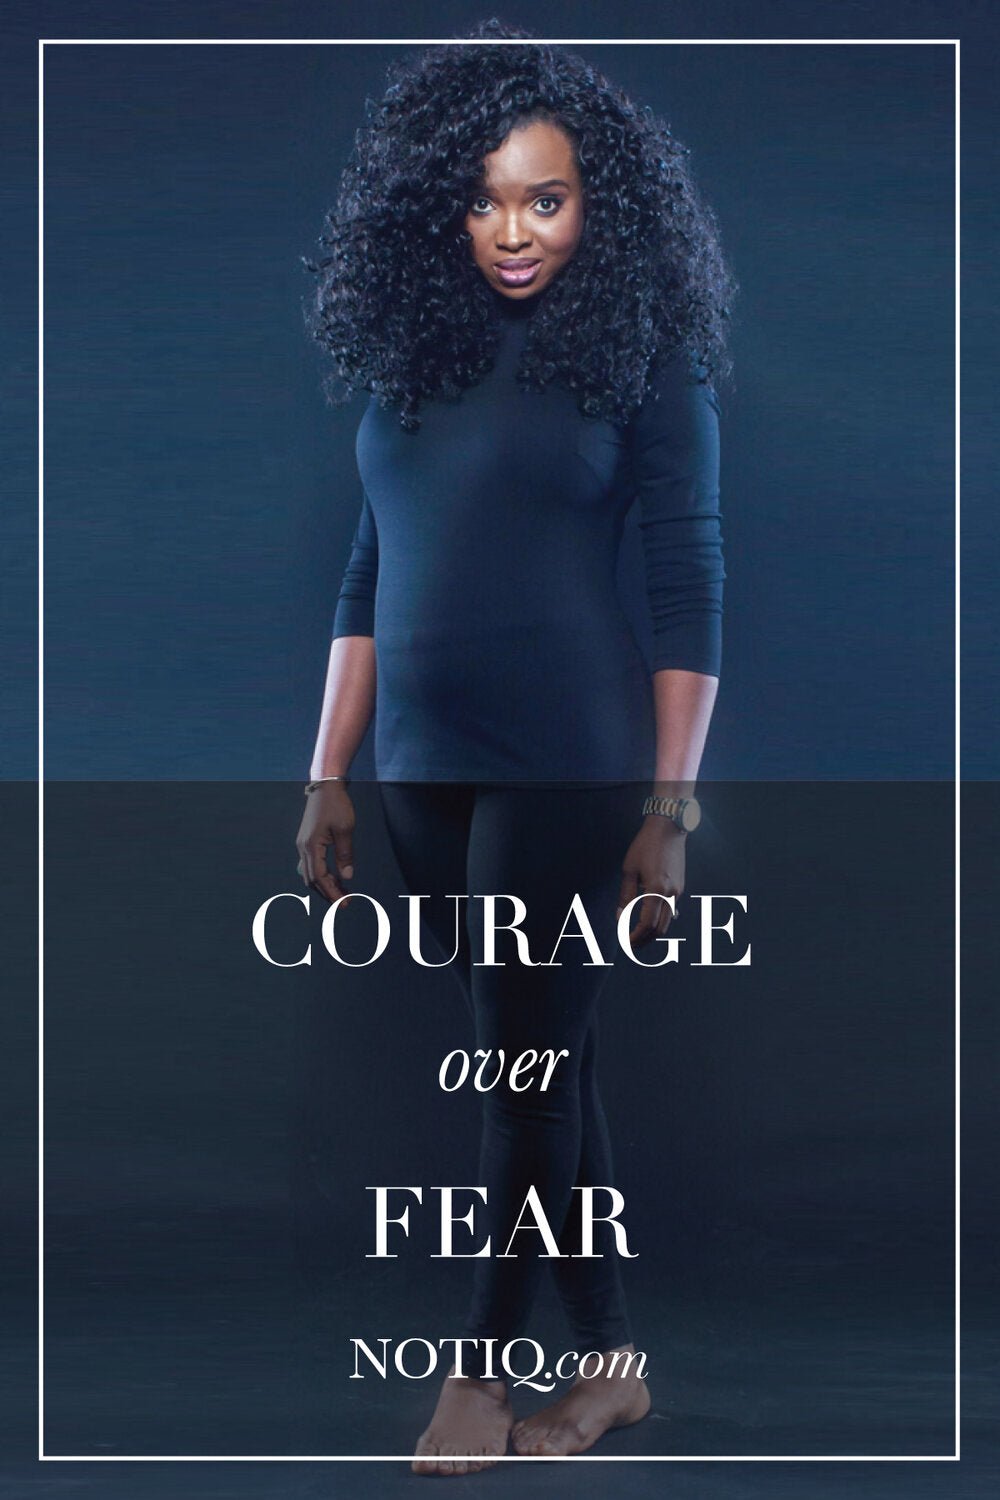 Courage over Fear - NOTIQ